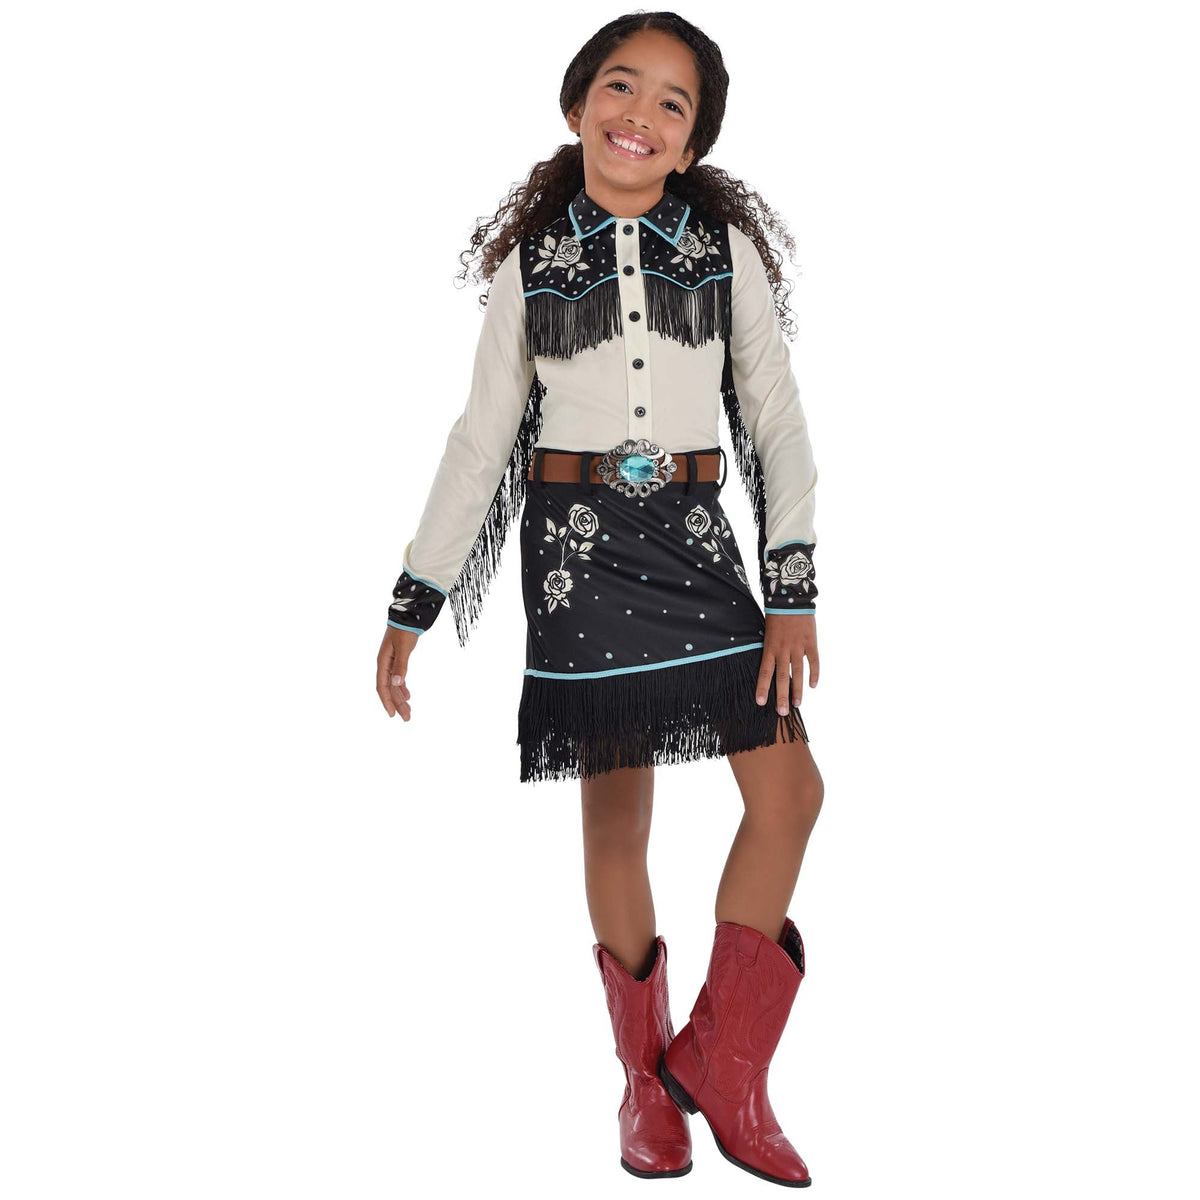 HALLOWEEN COSTUME CO. Costumes Western Cowgirl Costume for Kids, Dress